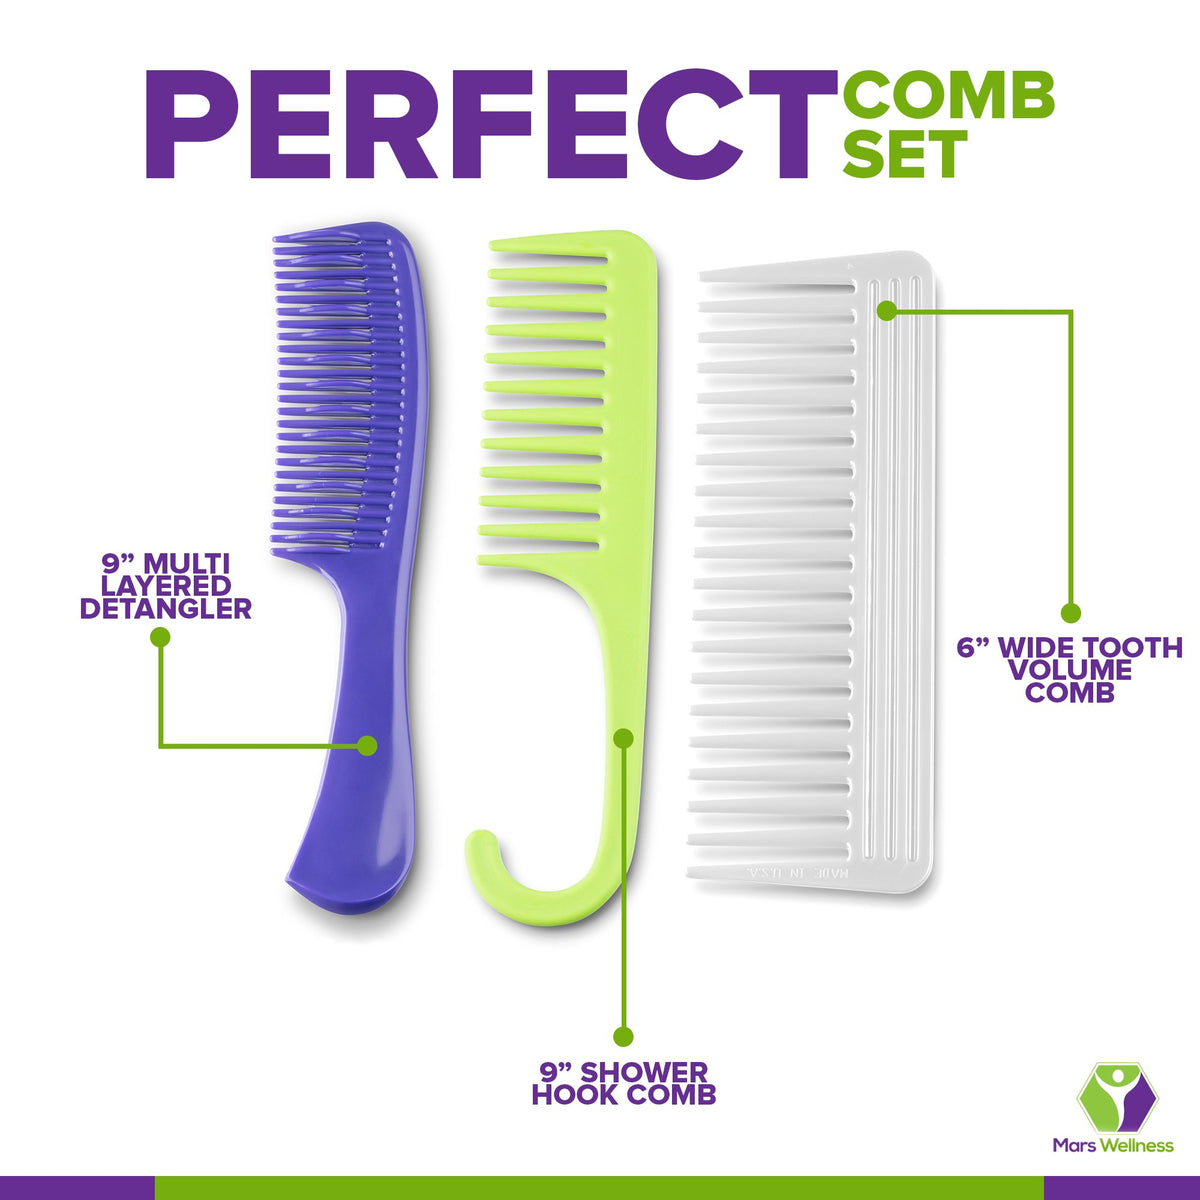 Mars Wellness 3 Piece Professional Detangling Shower Comb Set - USA MADE - Detangler, Hook Comb, Wide Tooth Comb - Premium Grade for Men and Women - Parting Teasing and styling - Mars Med Supply